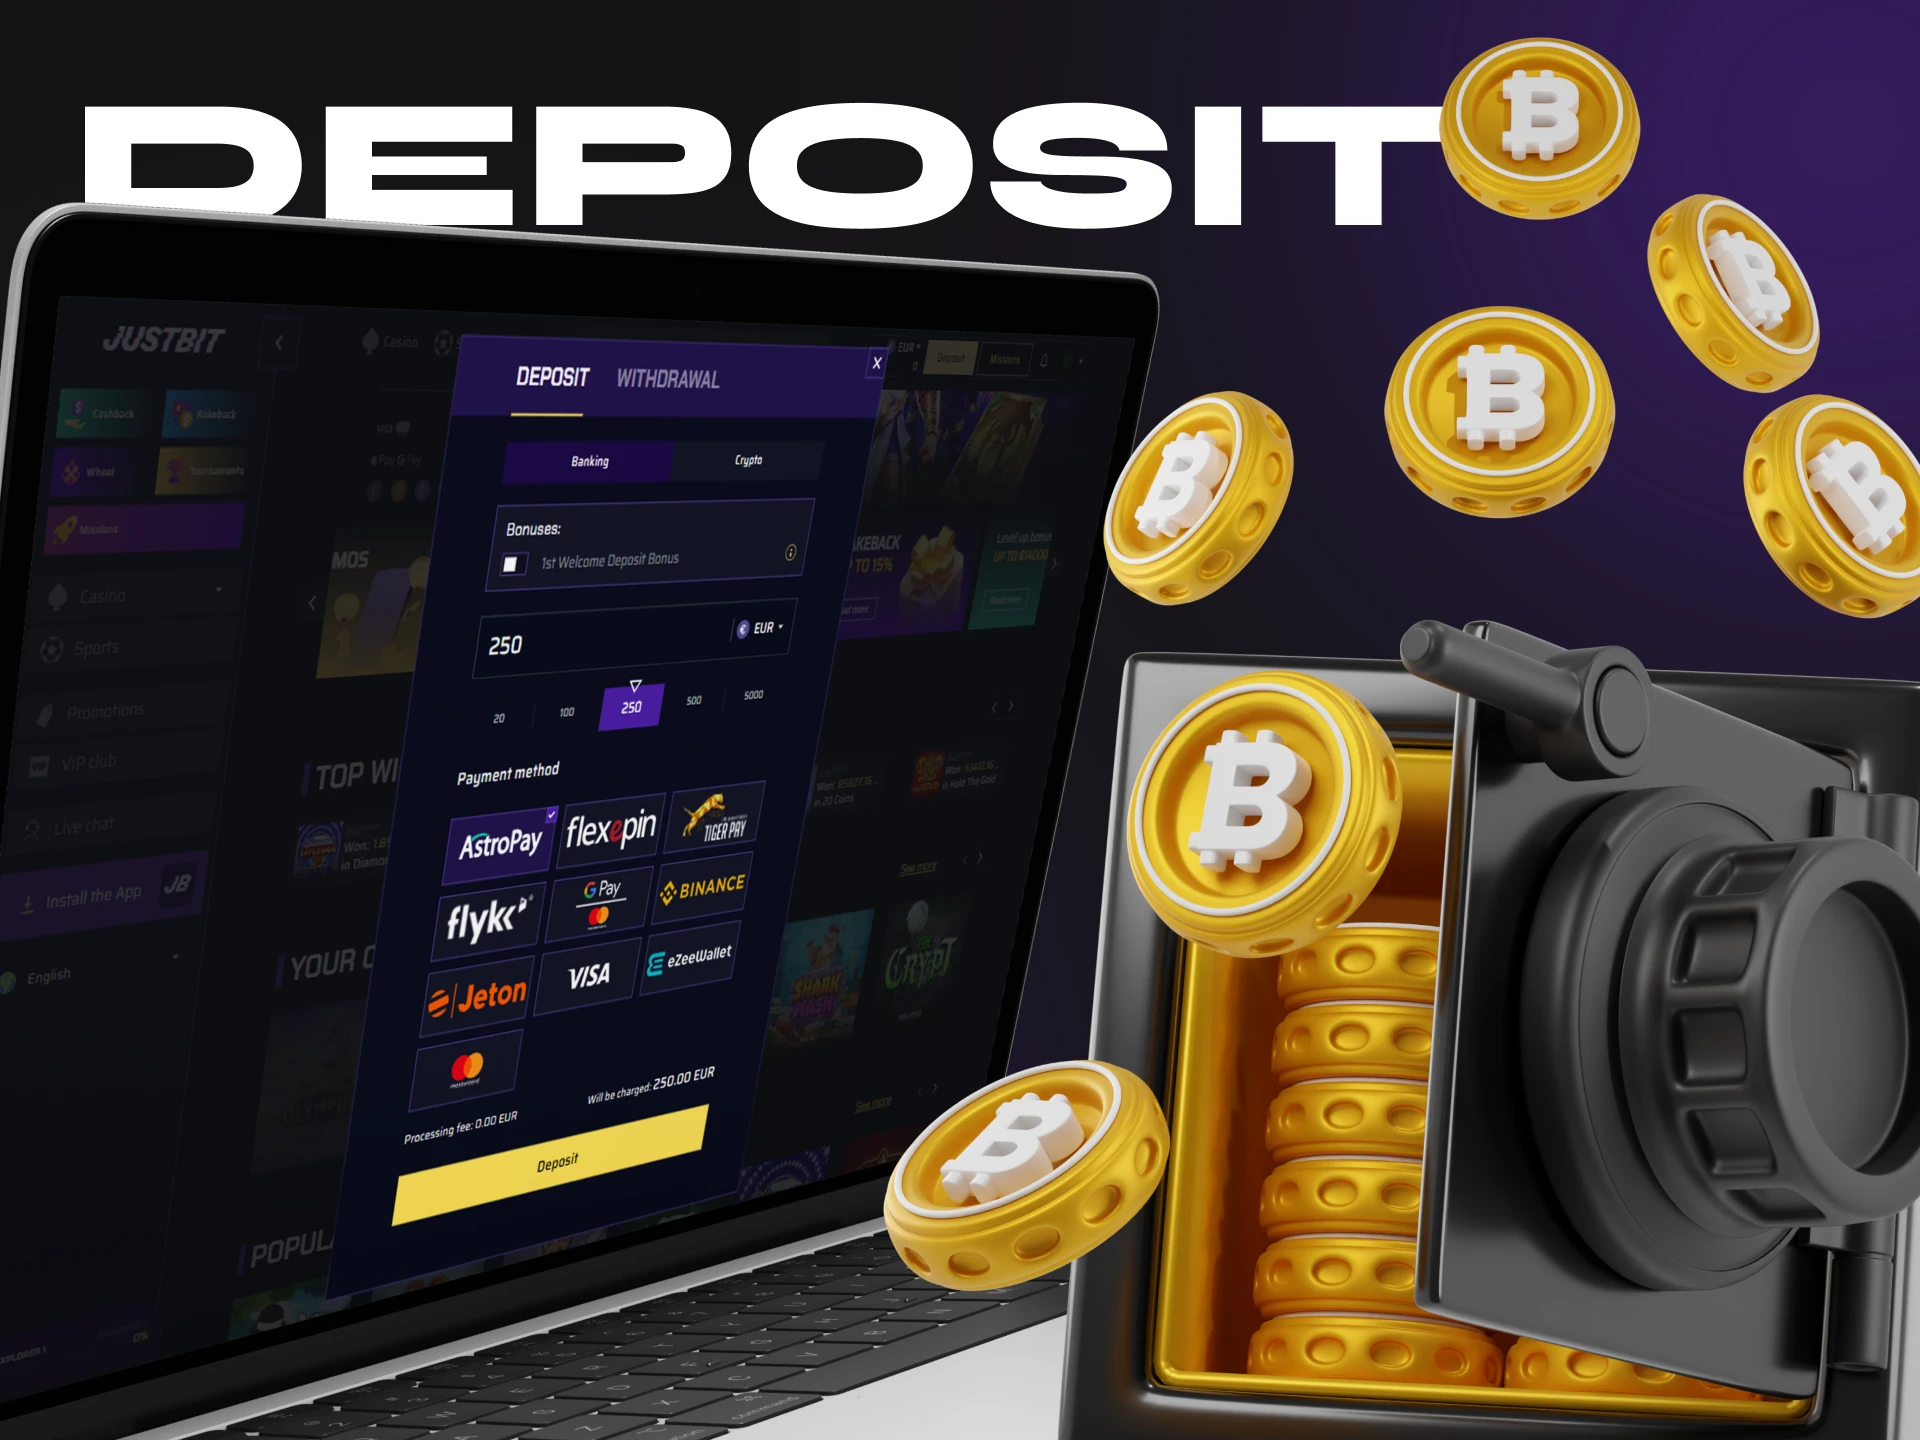 Follow the simple steps to deposit money into your Justbit Casino account.